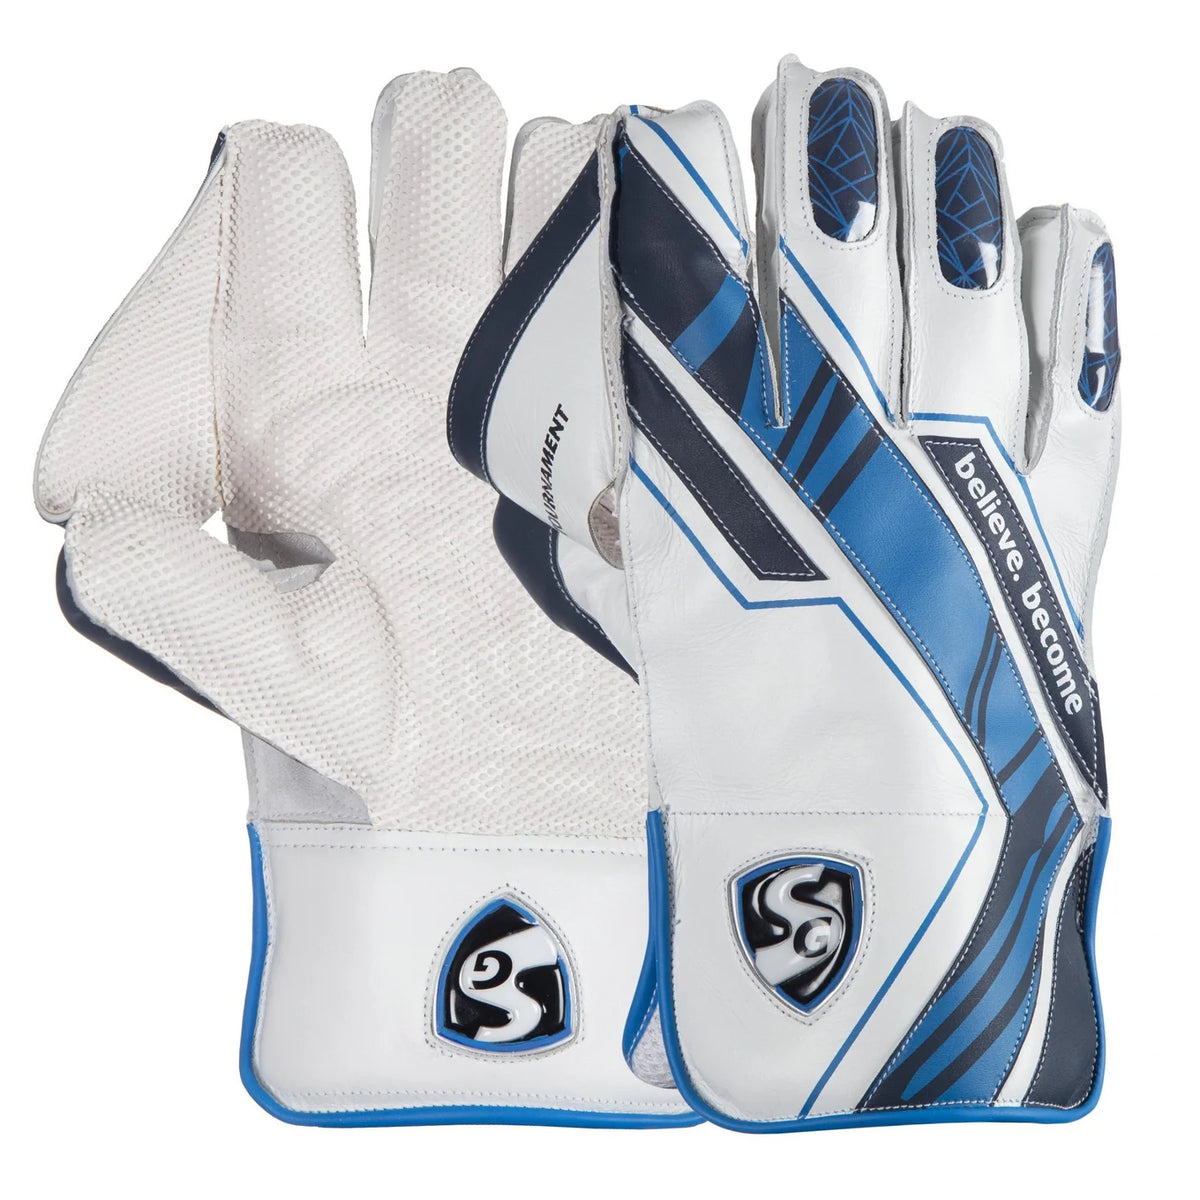 Pre-Order SG Tournament Wicket Keeping Gloves